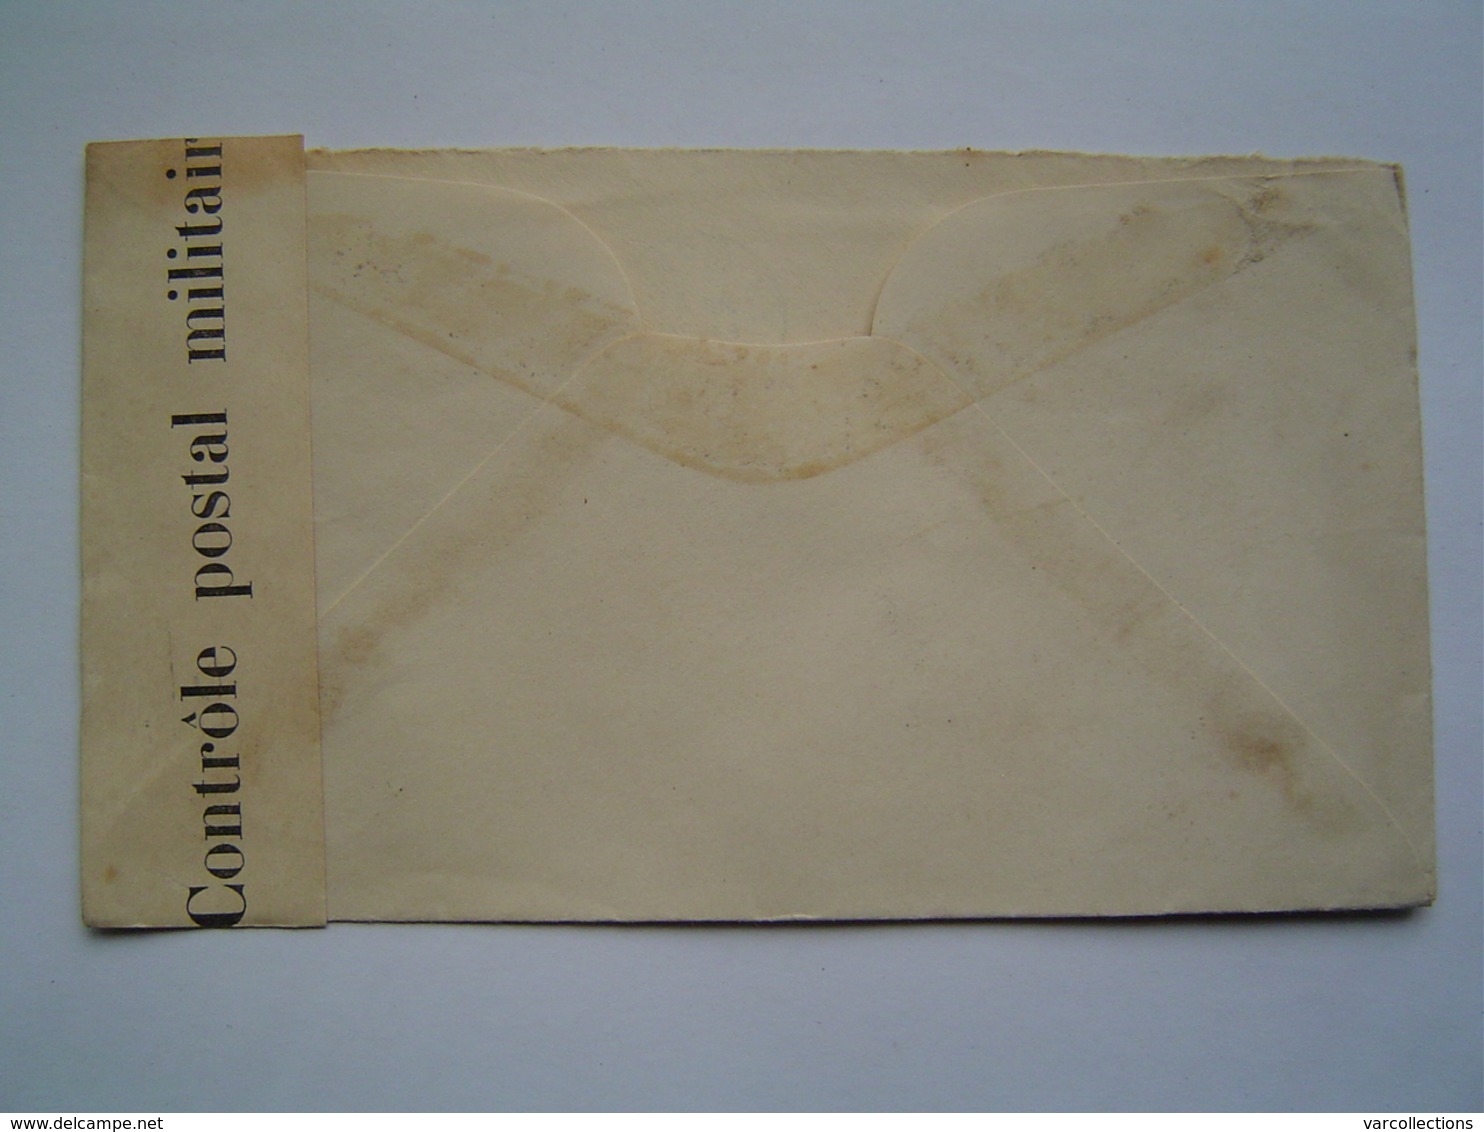 ENVELOPPE Ancienne 1941 : CONTROLE POSTAL MILITAIRE / NEW JERSEY - USA Via PAPEETE / TAHITI / OCEANIE - Covers & Documents